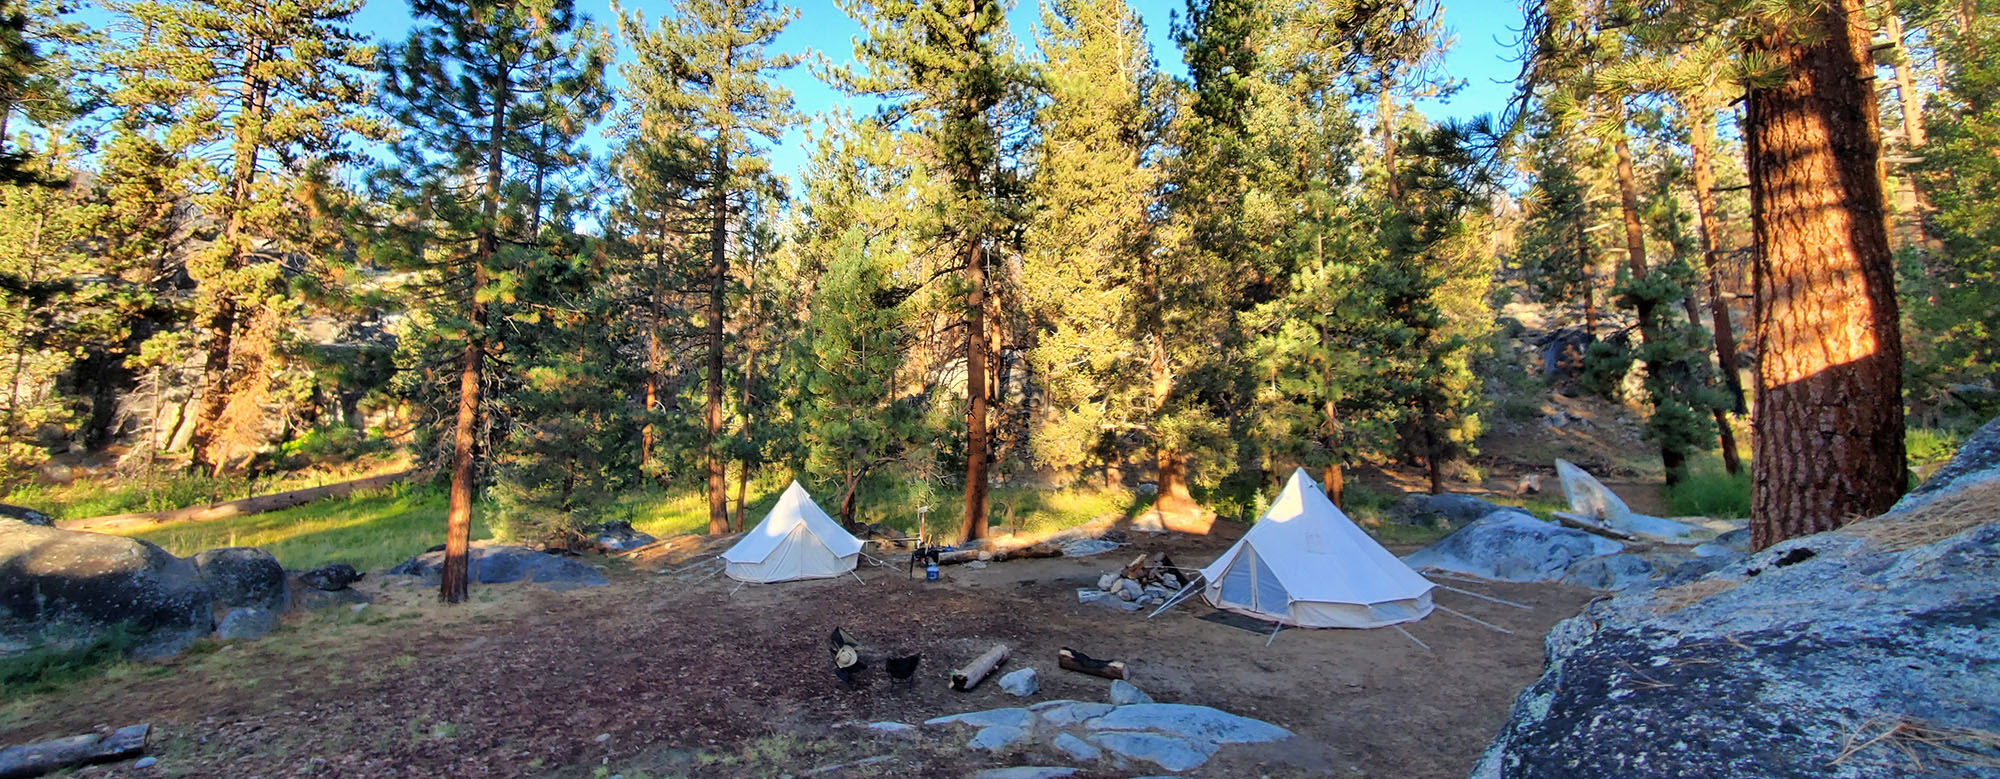 Camping and Outdoor Education